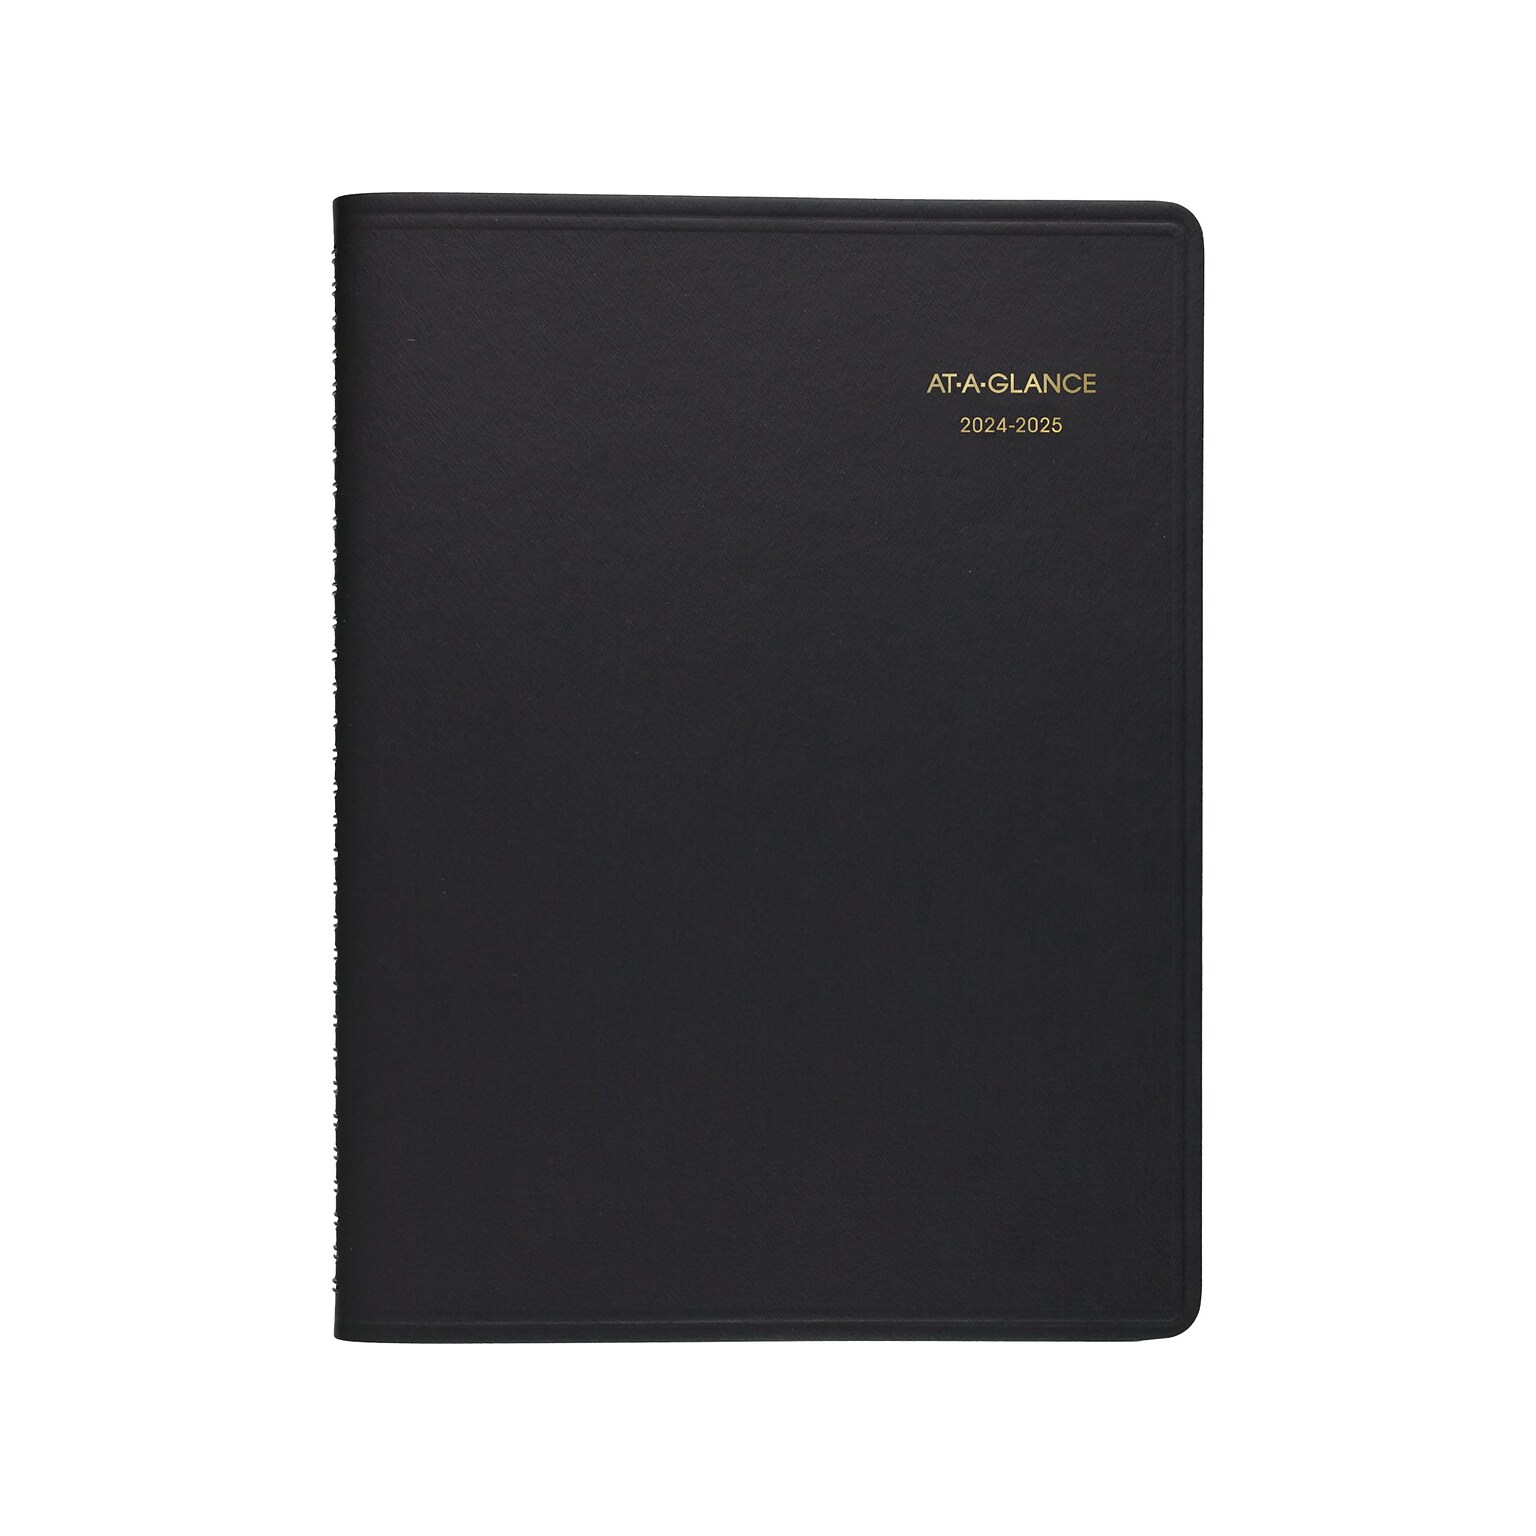 2024-2025 AT-A-GLANCE 8.25 x 11 Academic Weekly Appointment Book, Faux Leather Cover, Black (70-957-05-25)